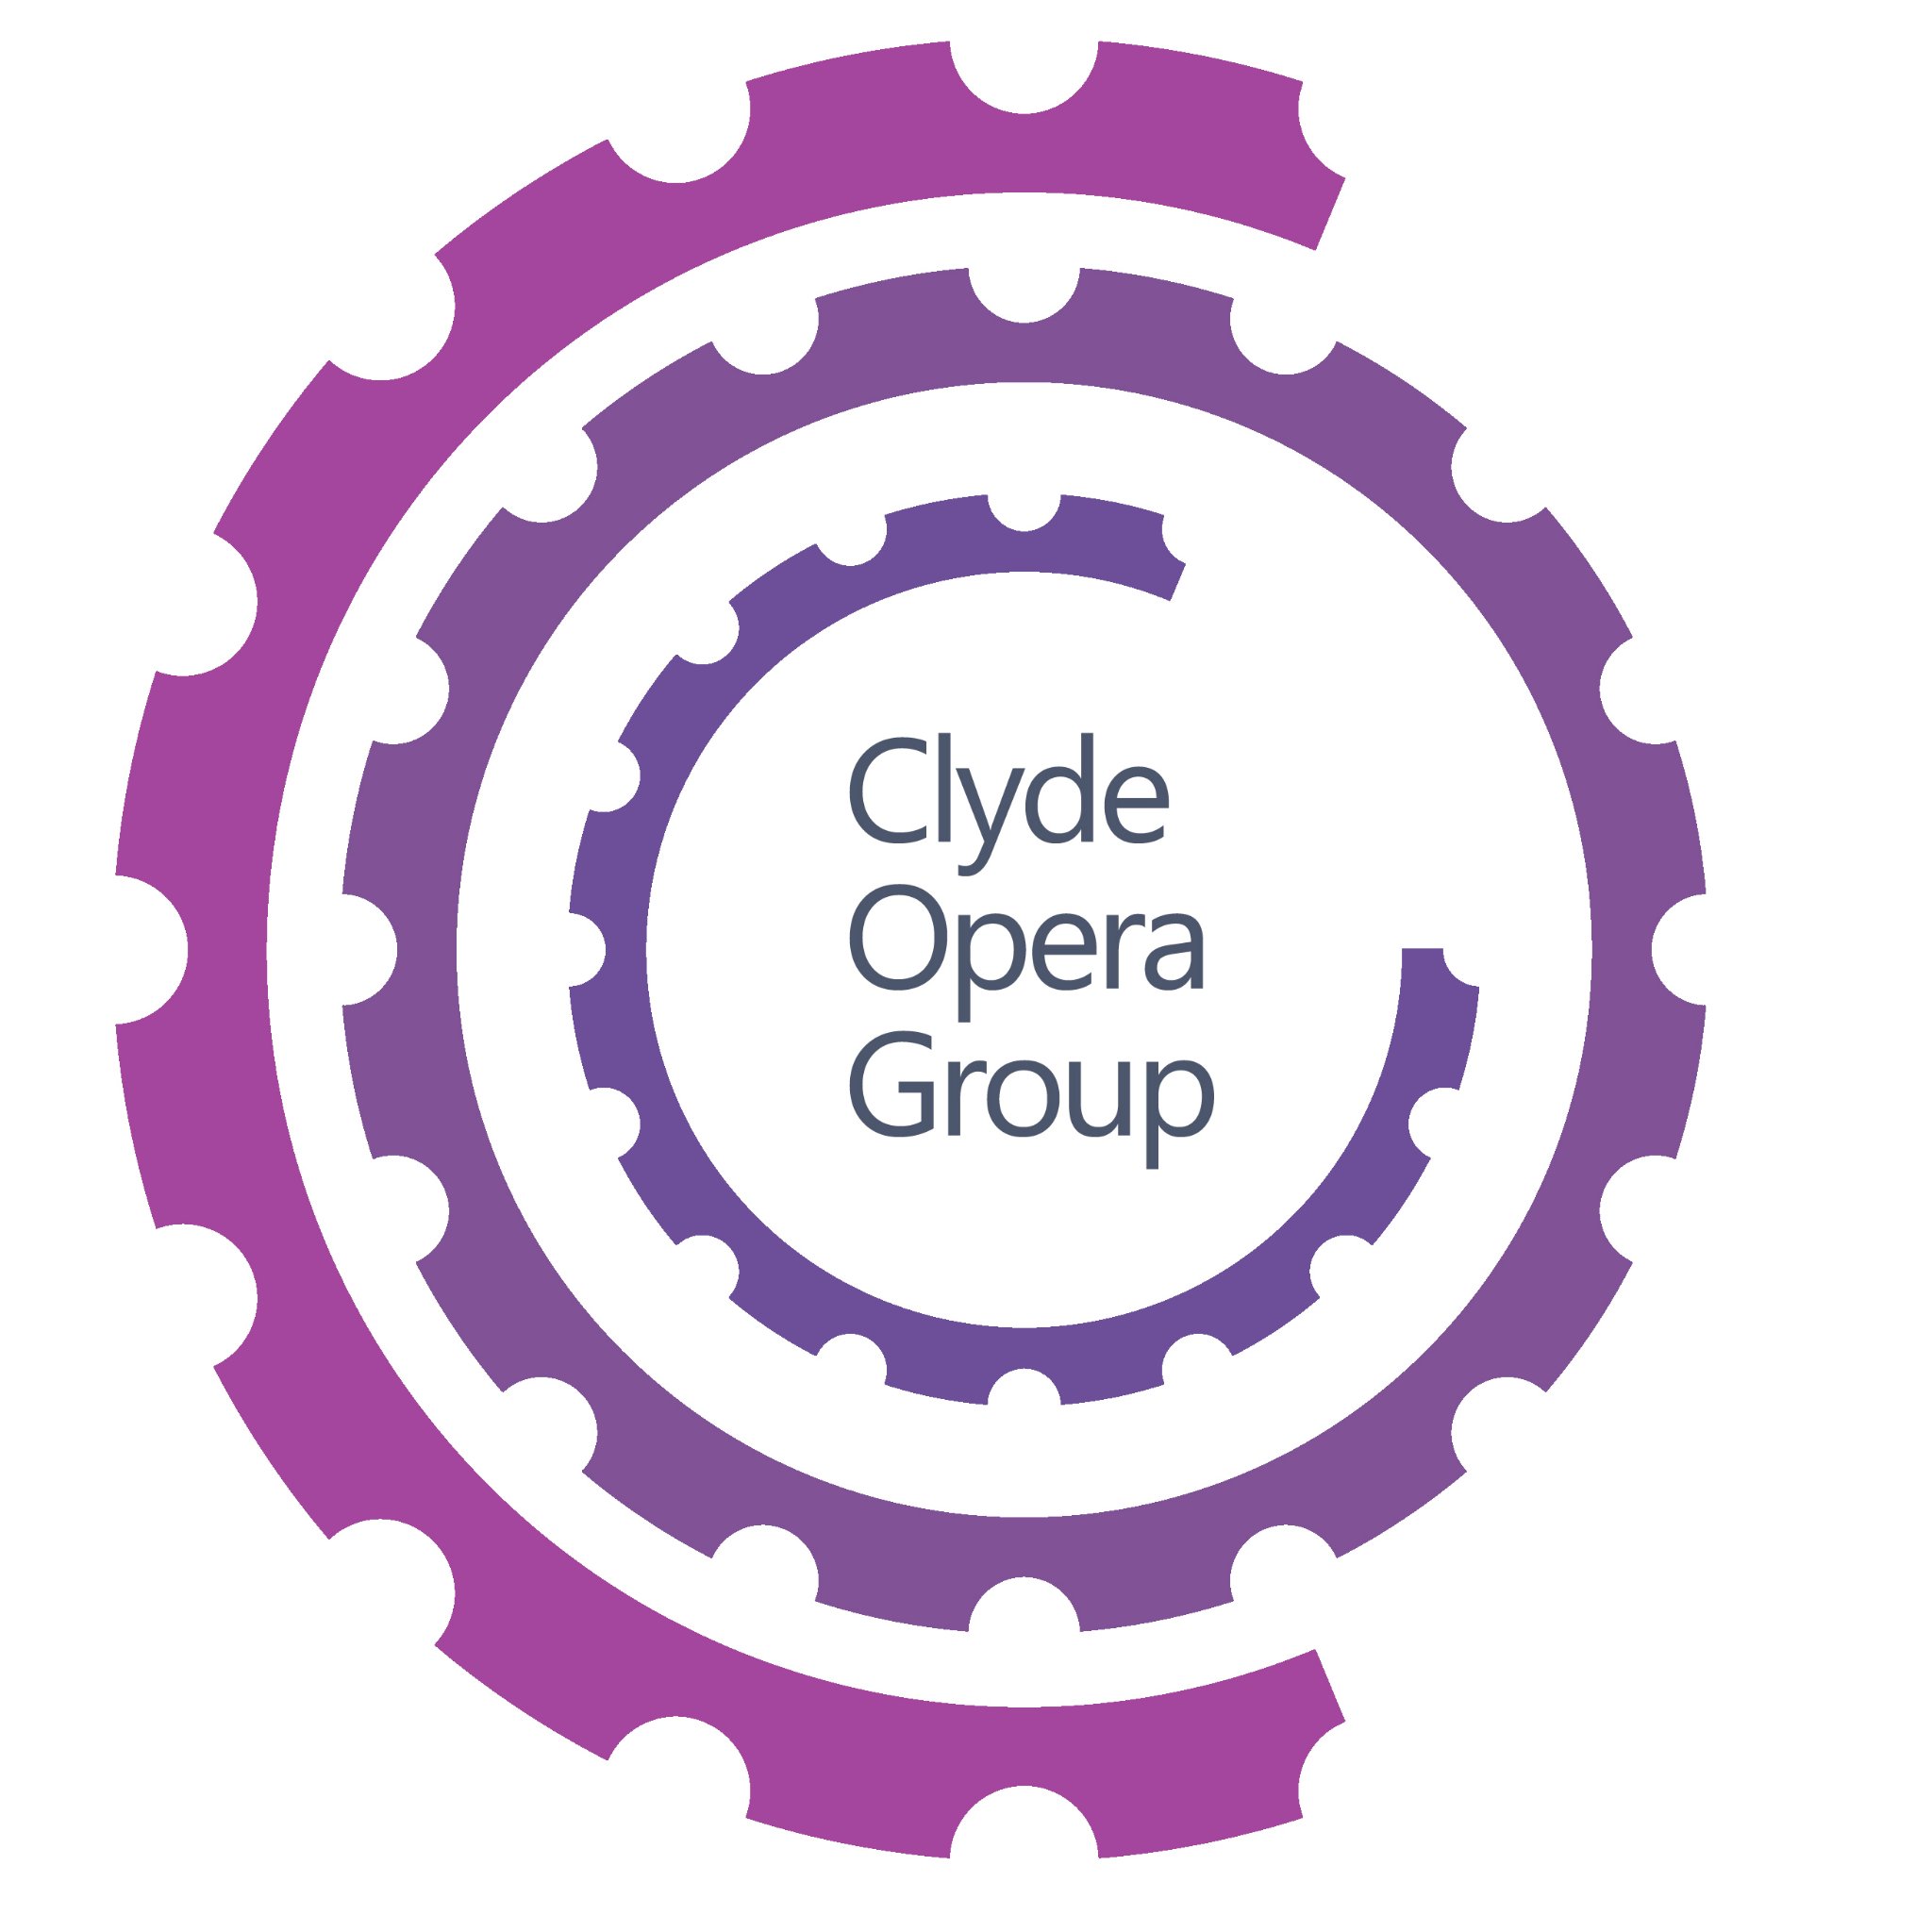 Clyde Opera Group is a new opera company based in Glasgow-Scotland. The first project for our company was the production of La Boheme (July 2016) in Glasgow.